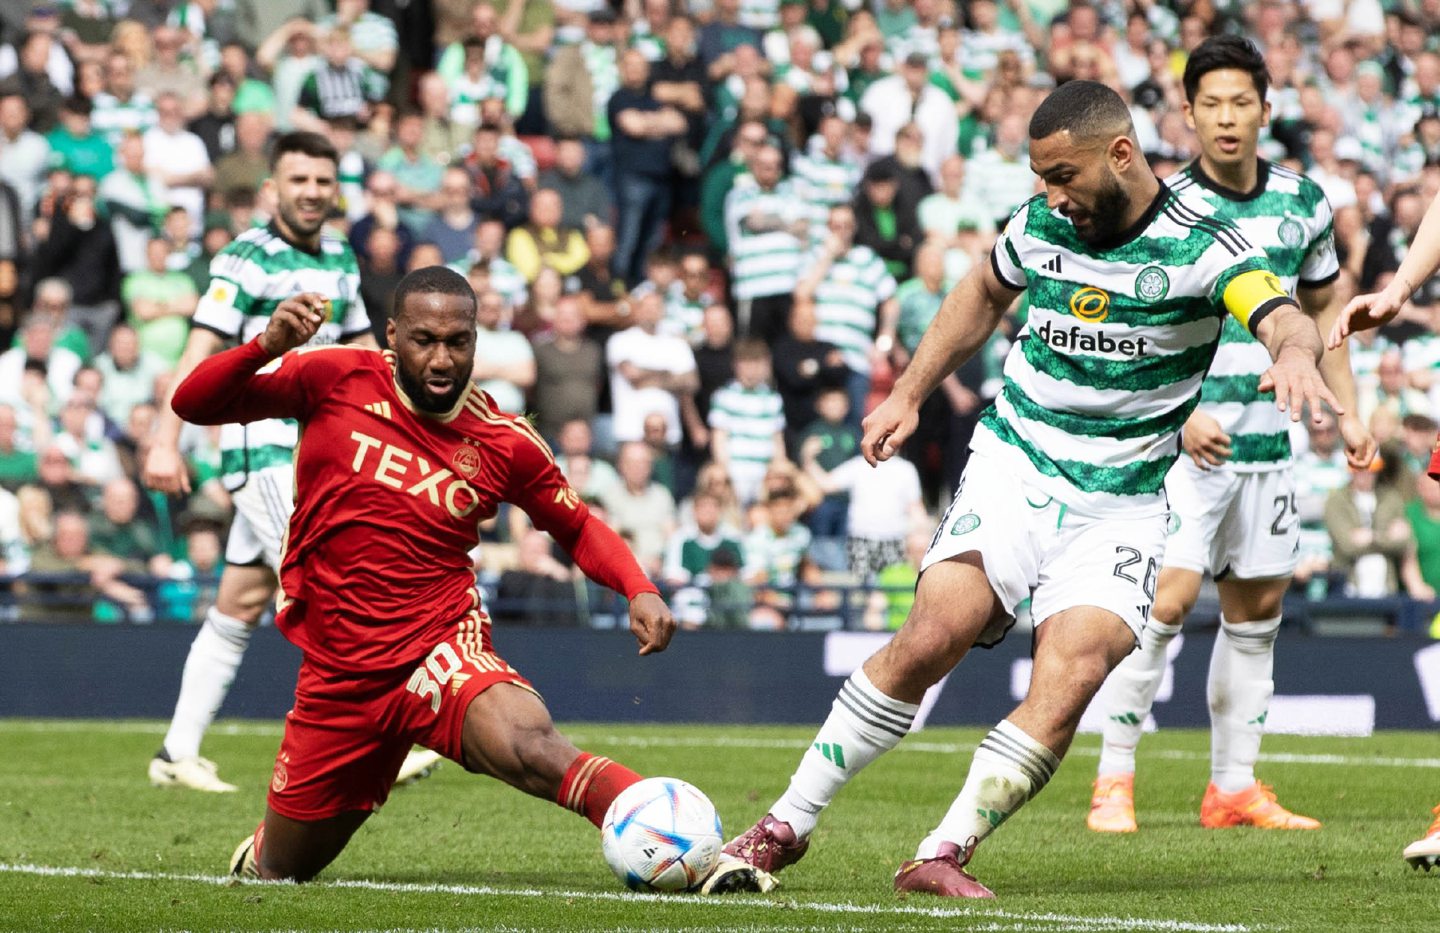 Aberdeen appeal for a penalty after Cameron Carter-Vickers fouls Junior Hoilett. Image: SNS.